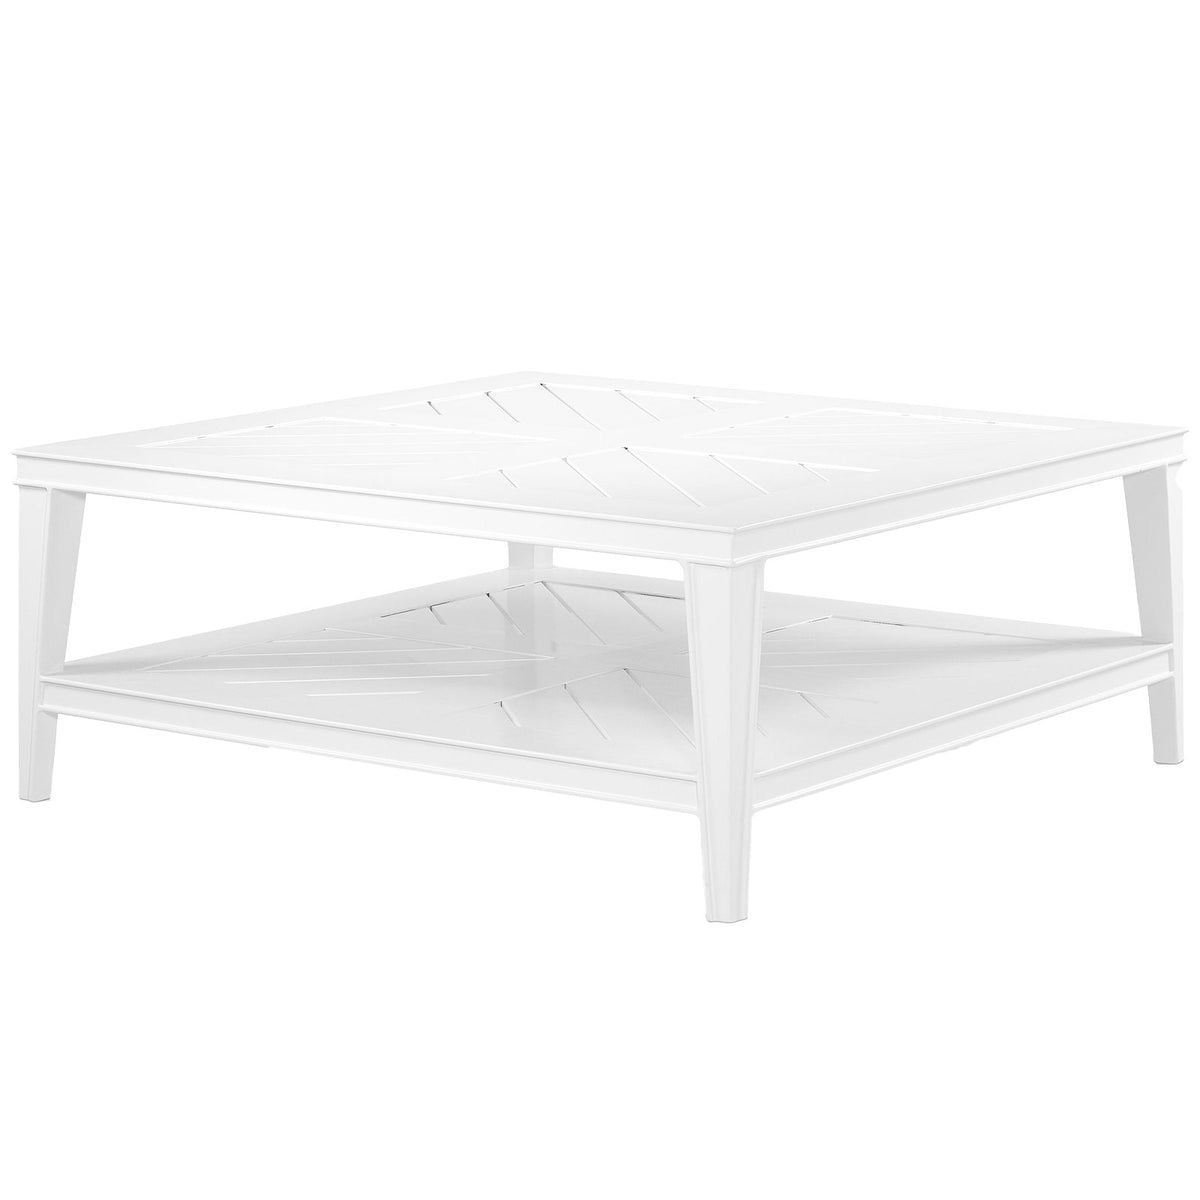 Bell Rive Square Outdoor Coffee Table, White